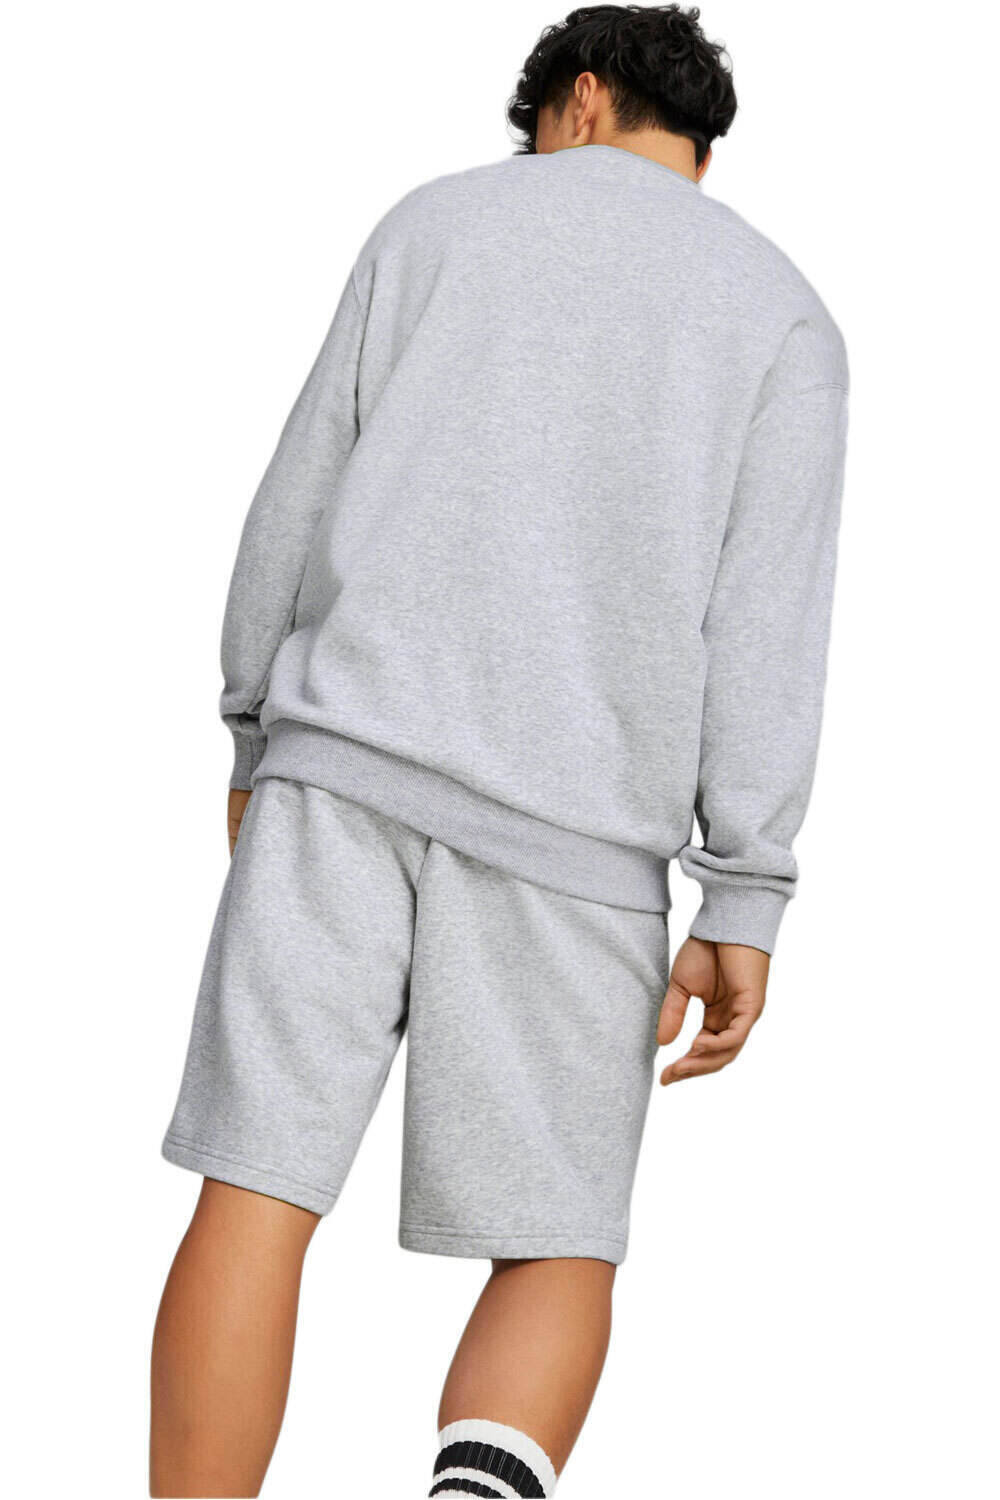 Puma chándal hombre Relaxed Sweat Suit vista trasera